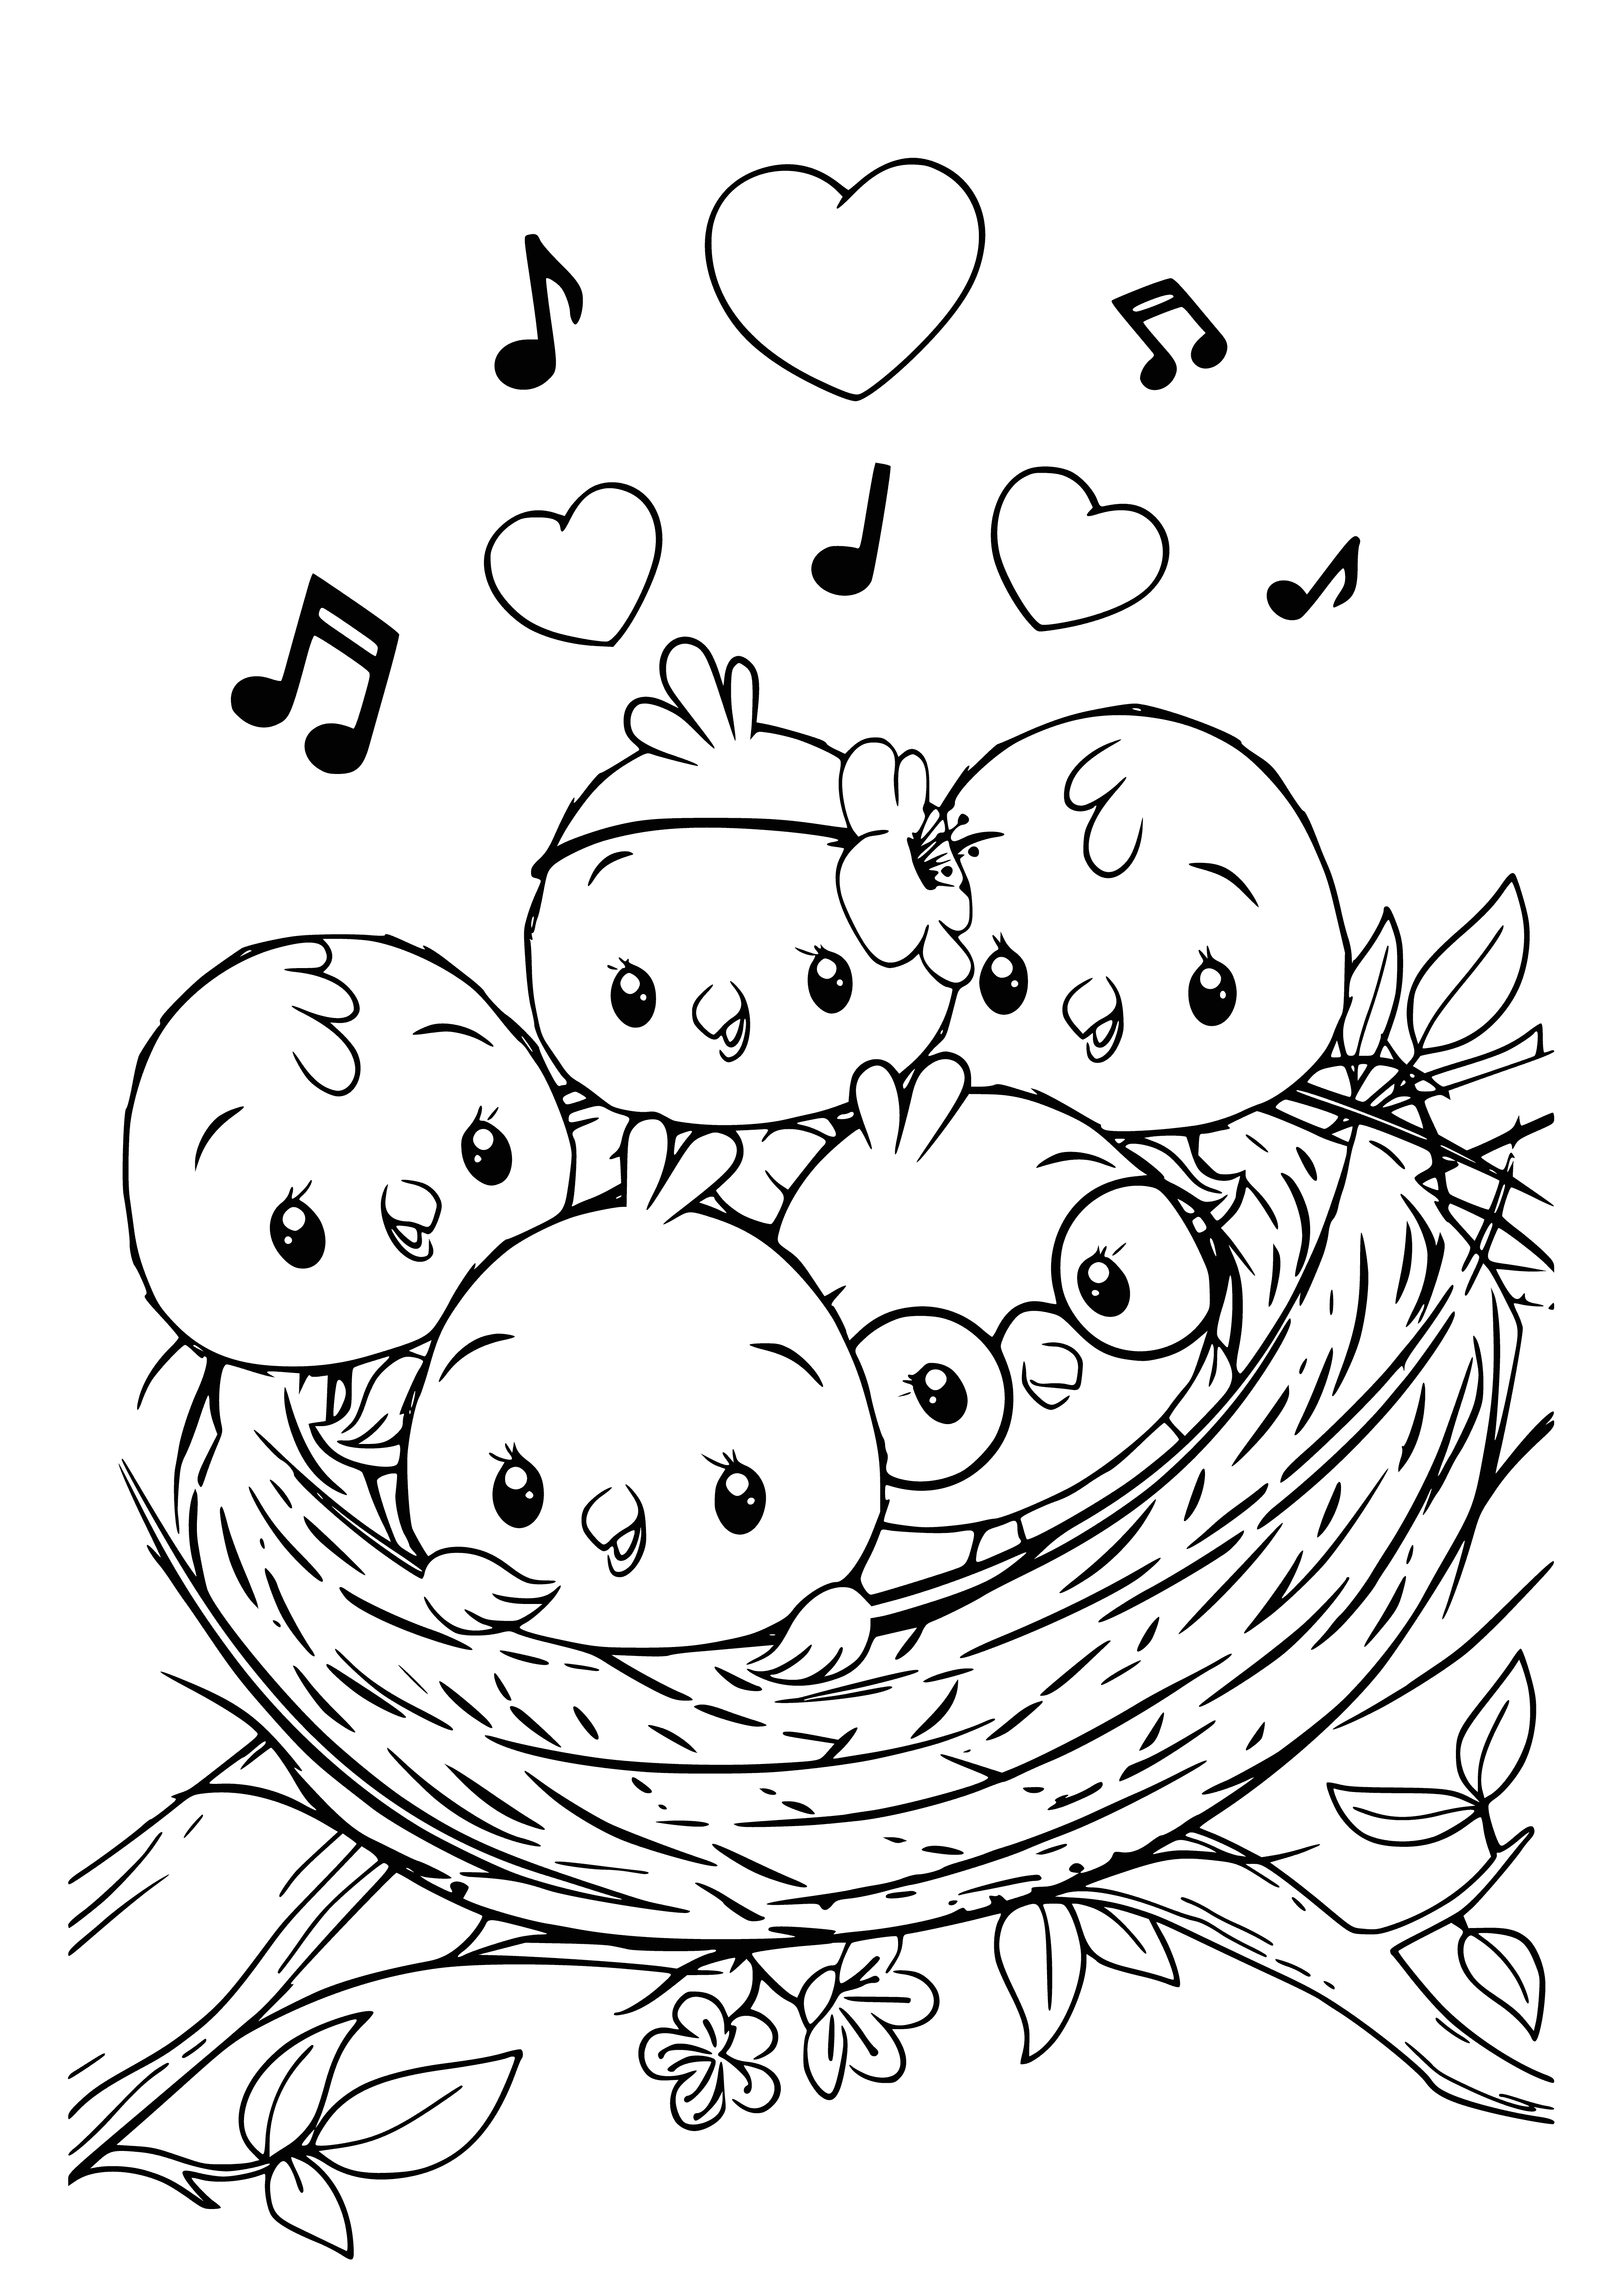 Chicks in the nest coloring page